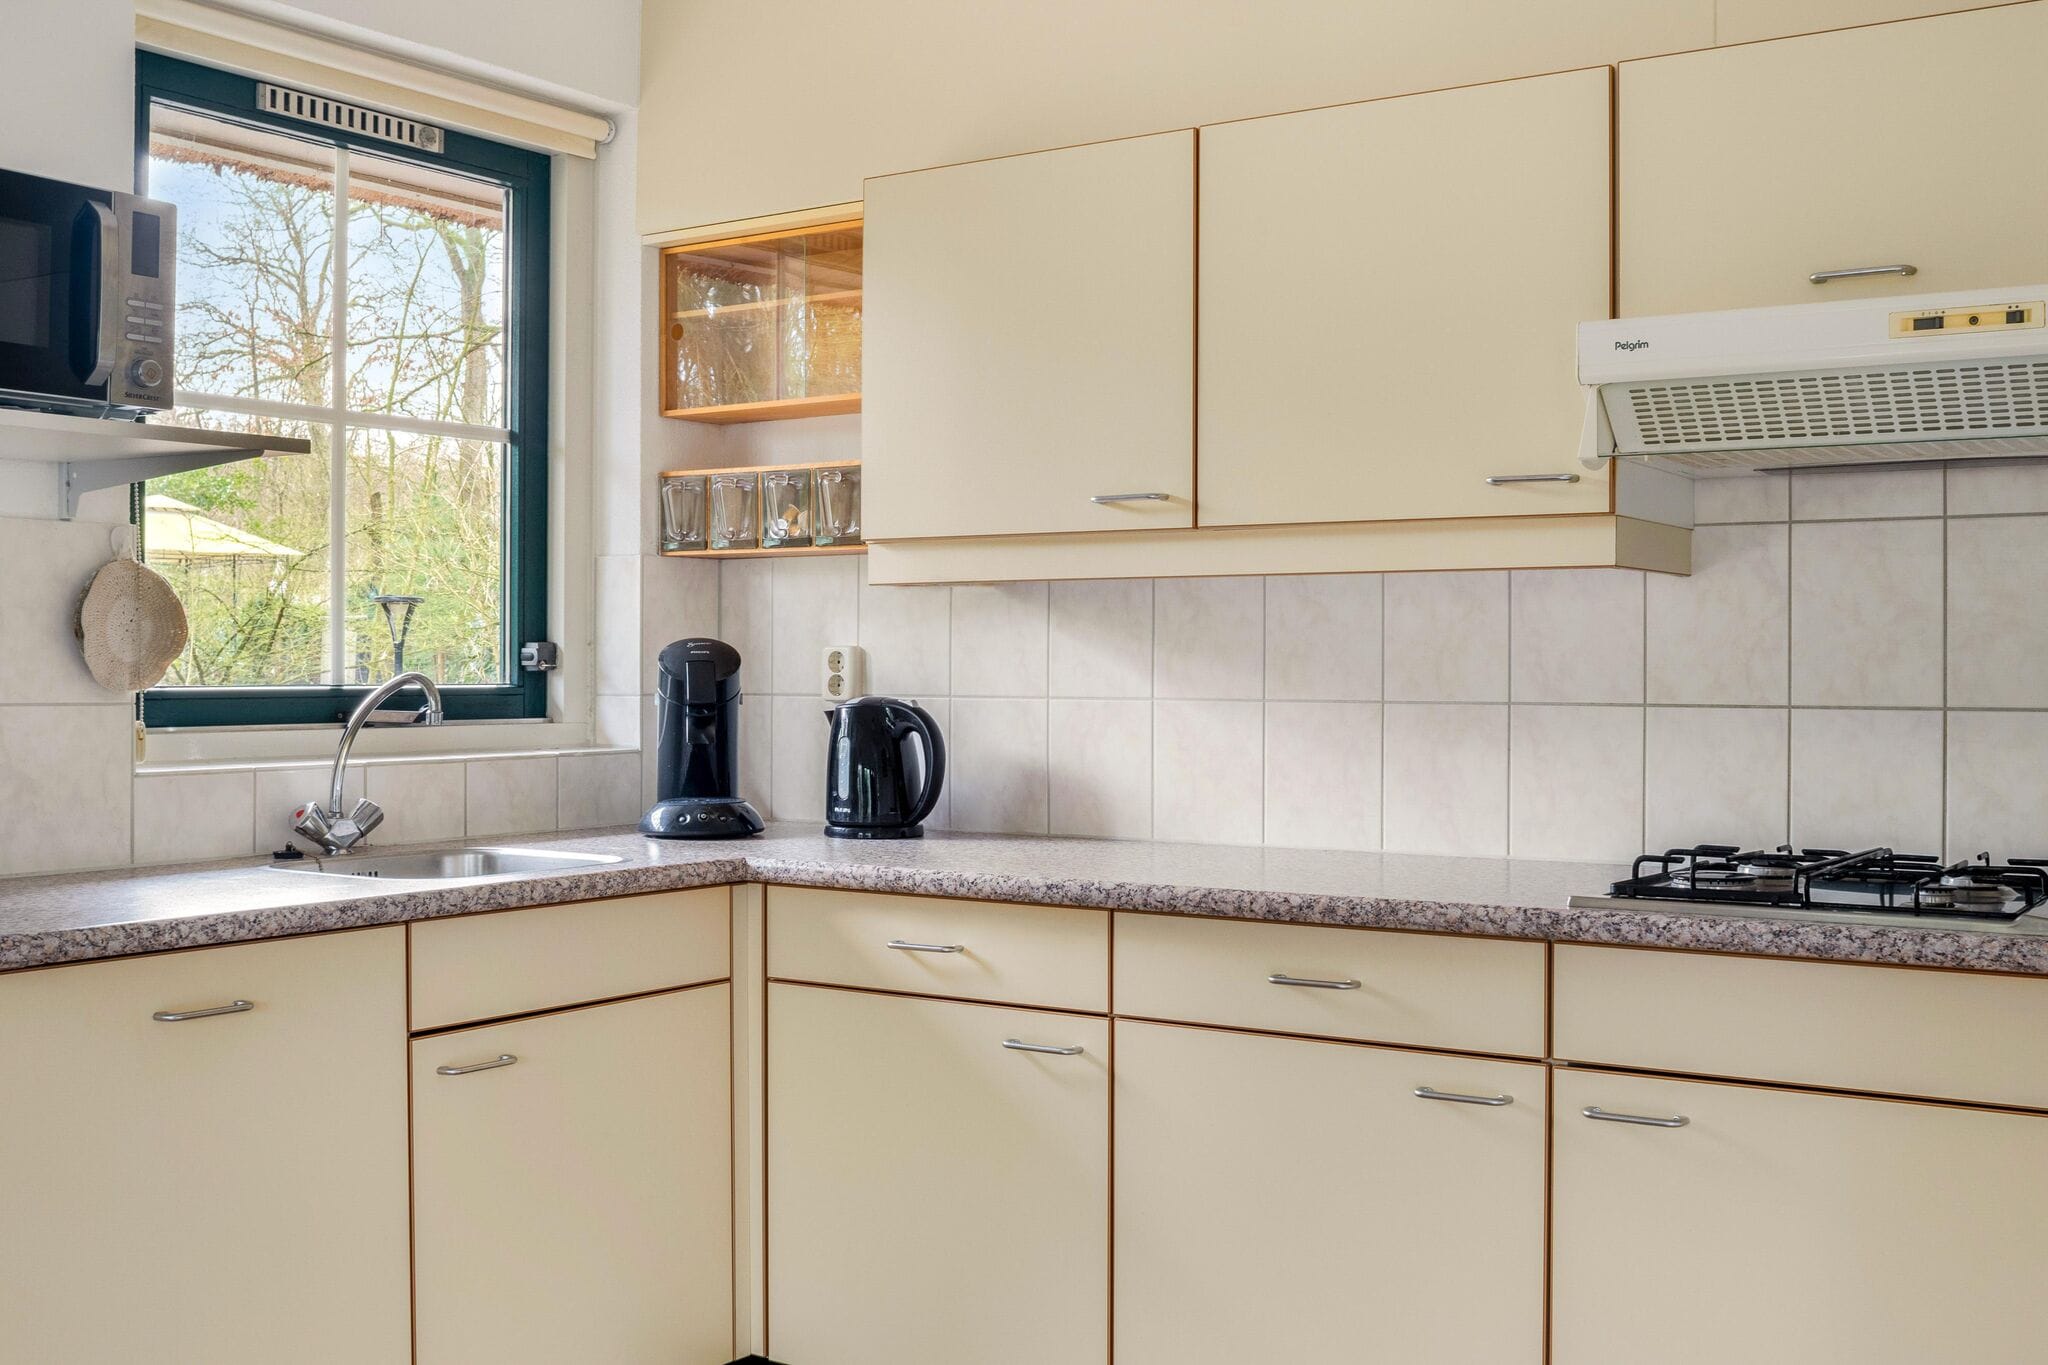 Holiday home with dishwasher, in a nature reserve